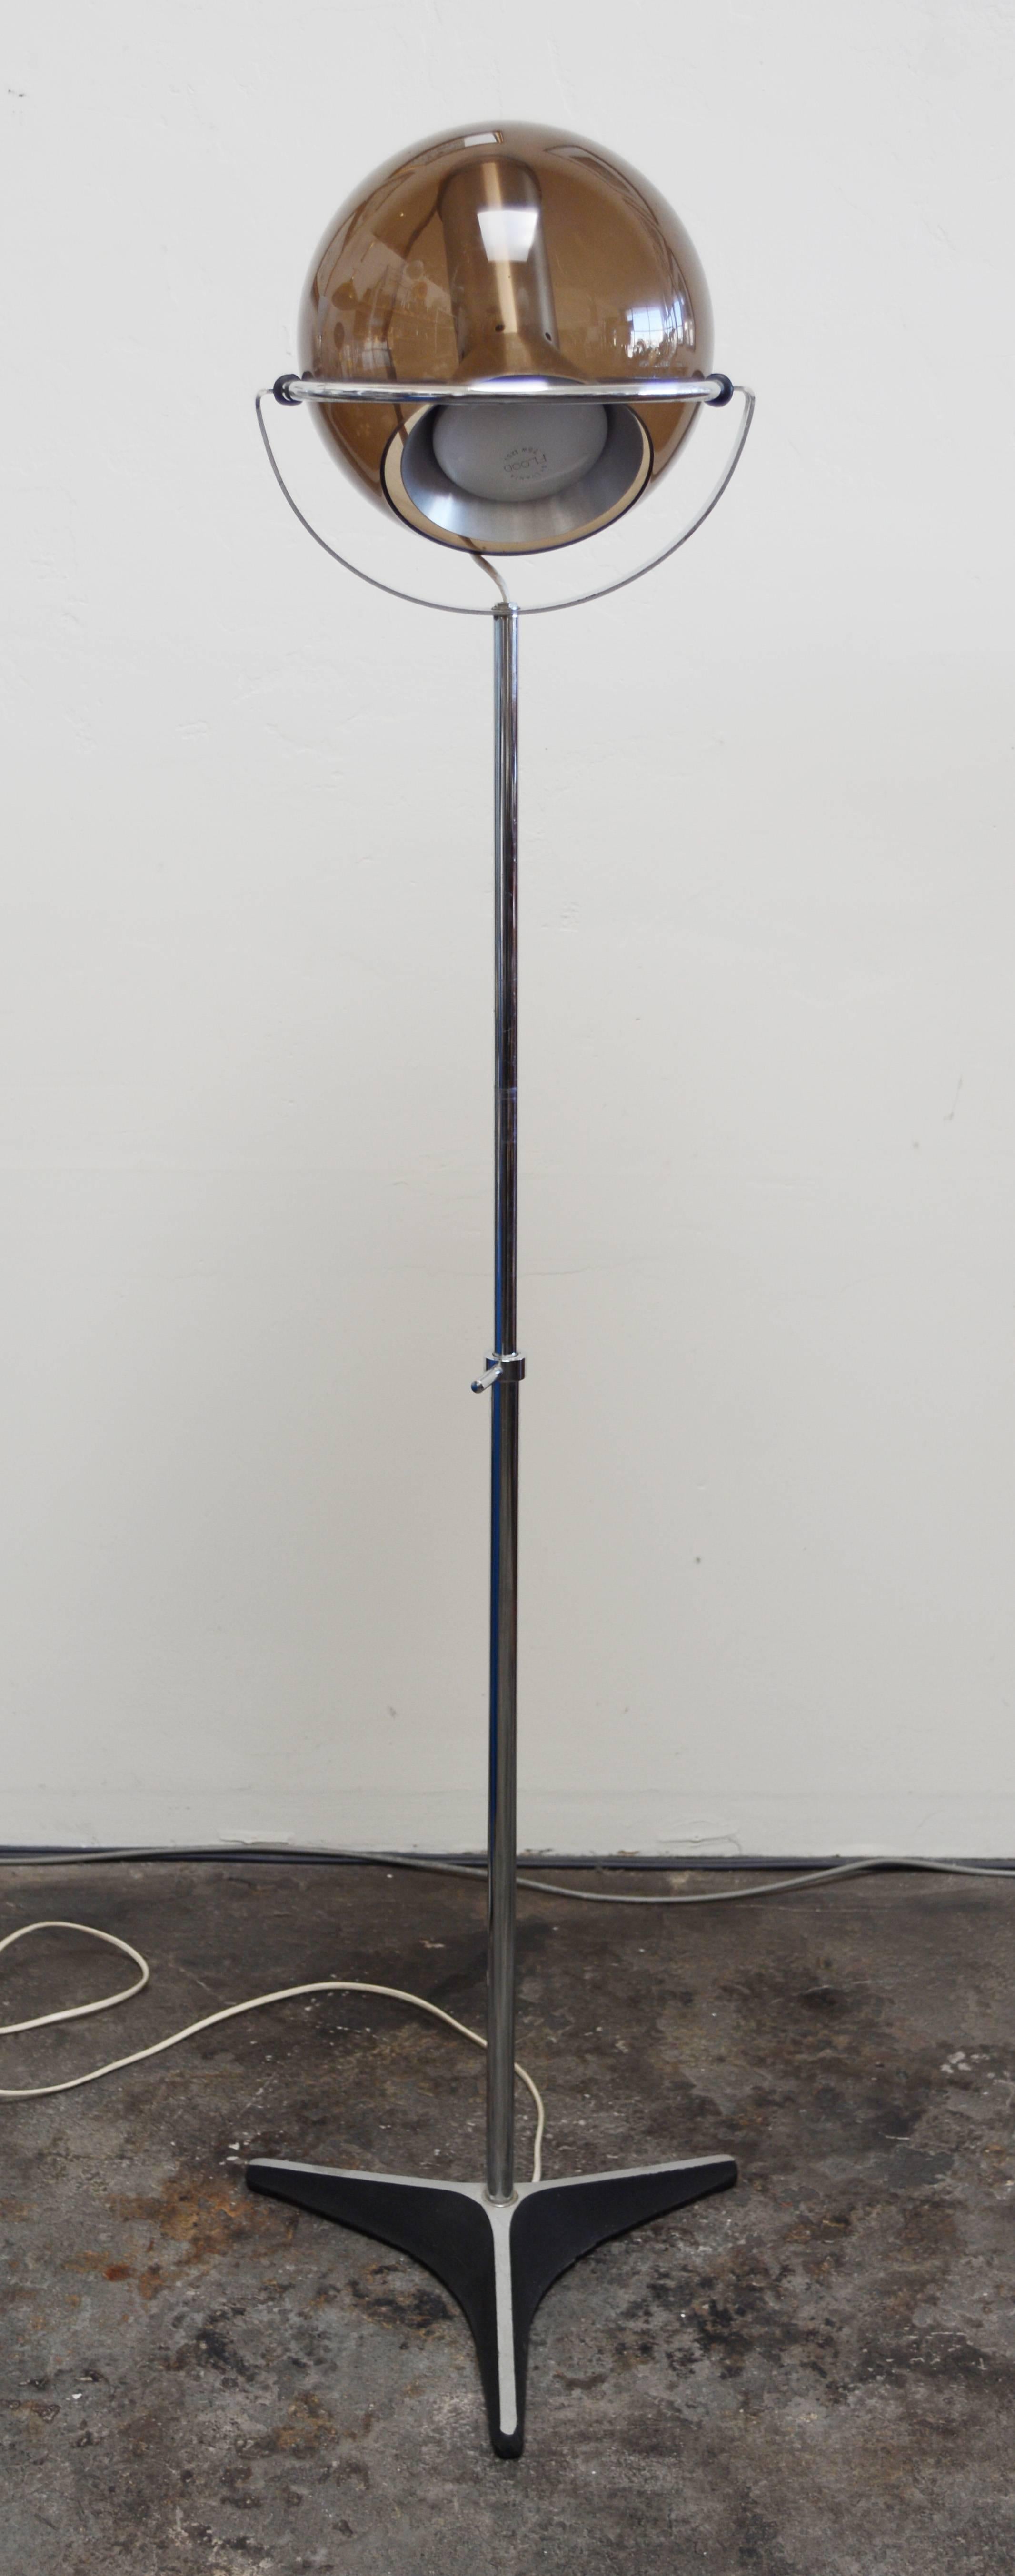 Adjustable floor lamp made by RAAK. This lamp adjusts in height from 48